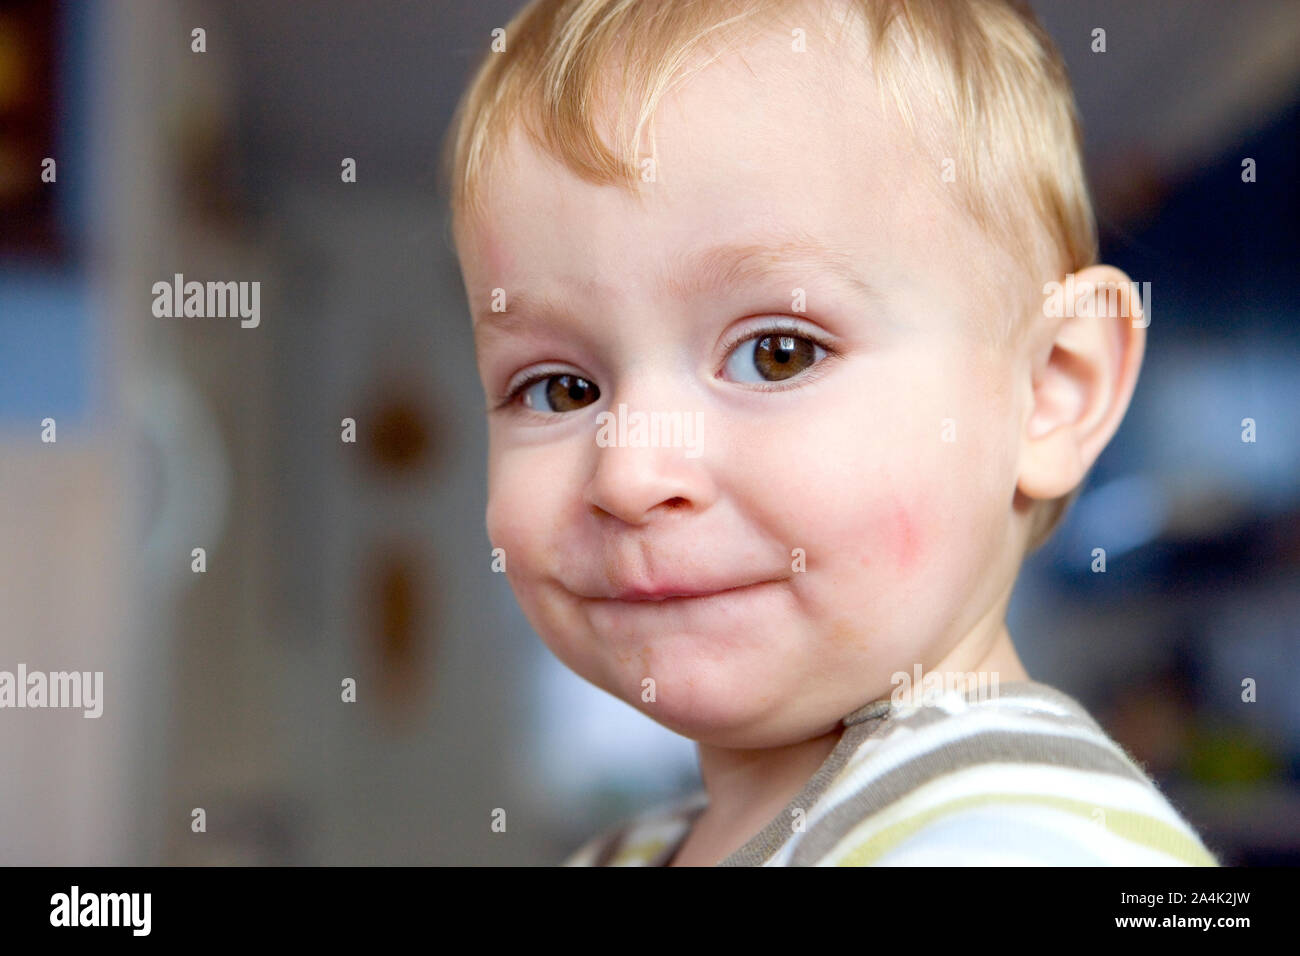 Boy With Brown Eyes And Blond Hair Stock Photo 329874801 Alamy